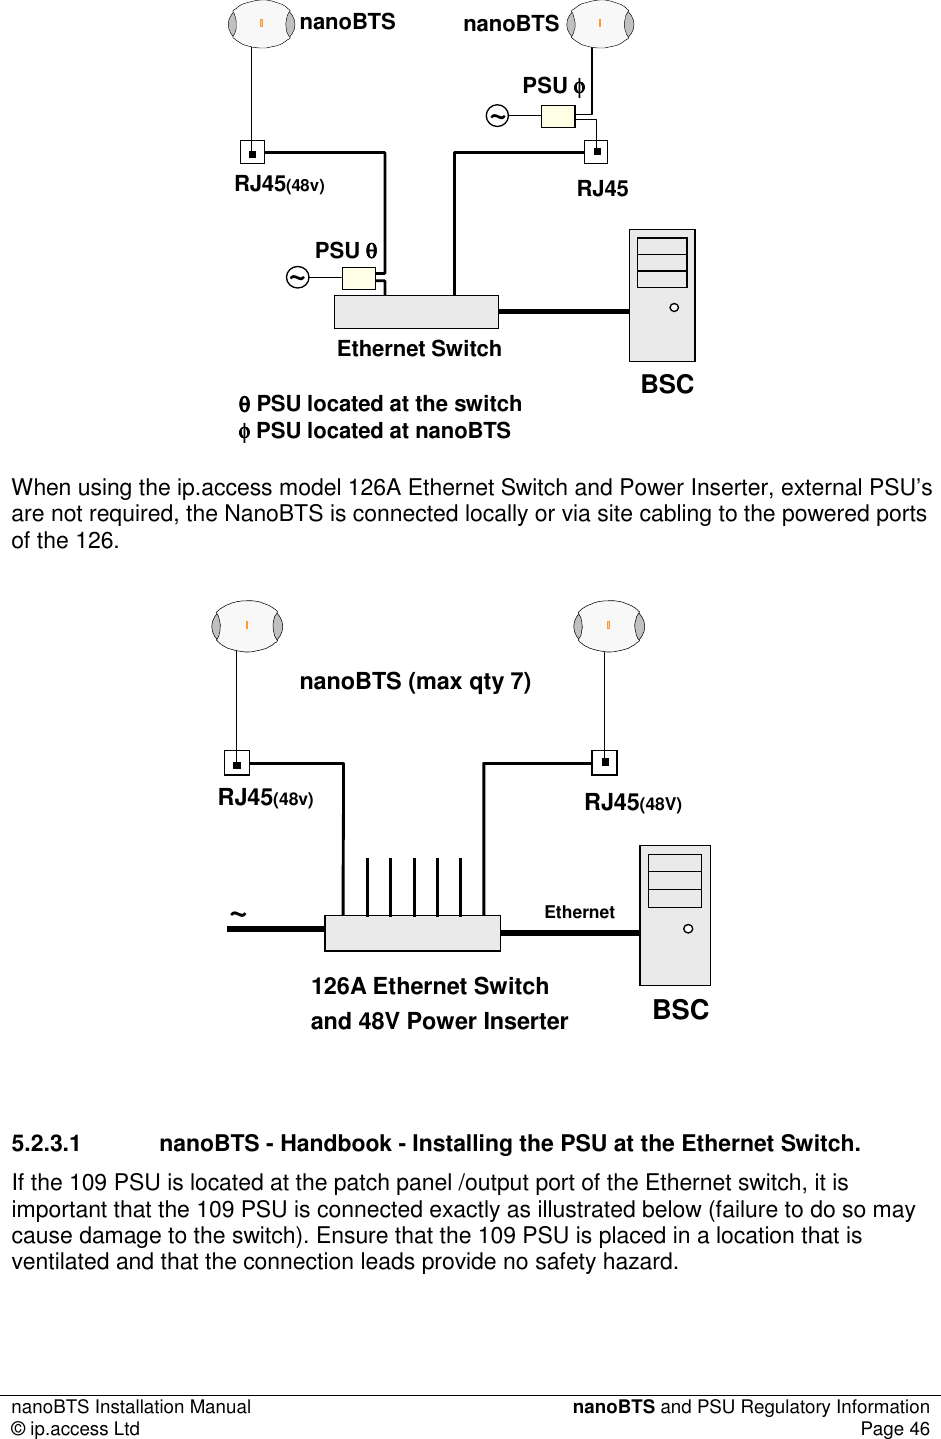 nanoBTS Installation Manual  nanoBTS and PSU Regulatory Information © ip.access Ltd  Page 46  Ethernet SwitchnanoBTS nanoBTSBSCRJ45(48v)~~RJ45PSU φφφφPSU θθθθθθθθPSU located at the switchφφφφPSU located at nanoBTS When using the ip.access model 126A Ethernet Switch and Power Inserter, external PSU’s are not required, the NanoBTS is connected locally or via site cabling to the powered ports of the 126. and 48V Power InserternanoBTS (max qty 7)BSCRJ45(48v)~RJ45(48V)126A Ethernet SwitchEthernet 5.2.3.1  nanoBTS - Handbook - Installing the PSU at the Ethernet Switch. If the 109 PSU is located at the patch panel /output port of the Ethernet switch, it is important that the 109 PSU is connected exactly as illustrated below (failure to do so may cause damage to the switch). Ensure that the 109 PSU is placed in a location that is ventilated and that the connection leads provide no safety hazard.  